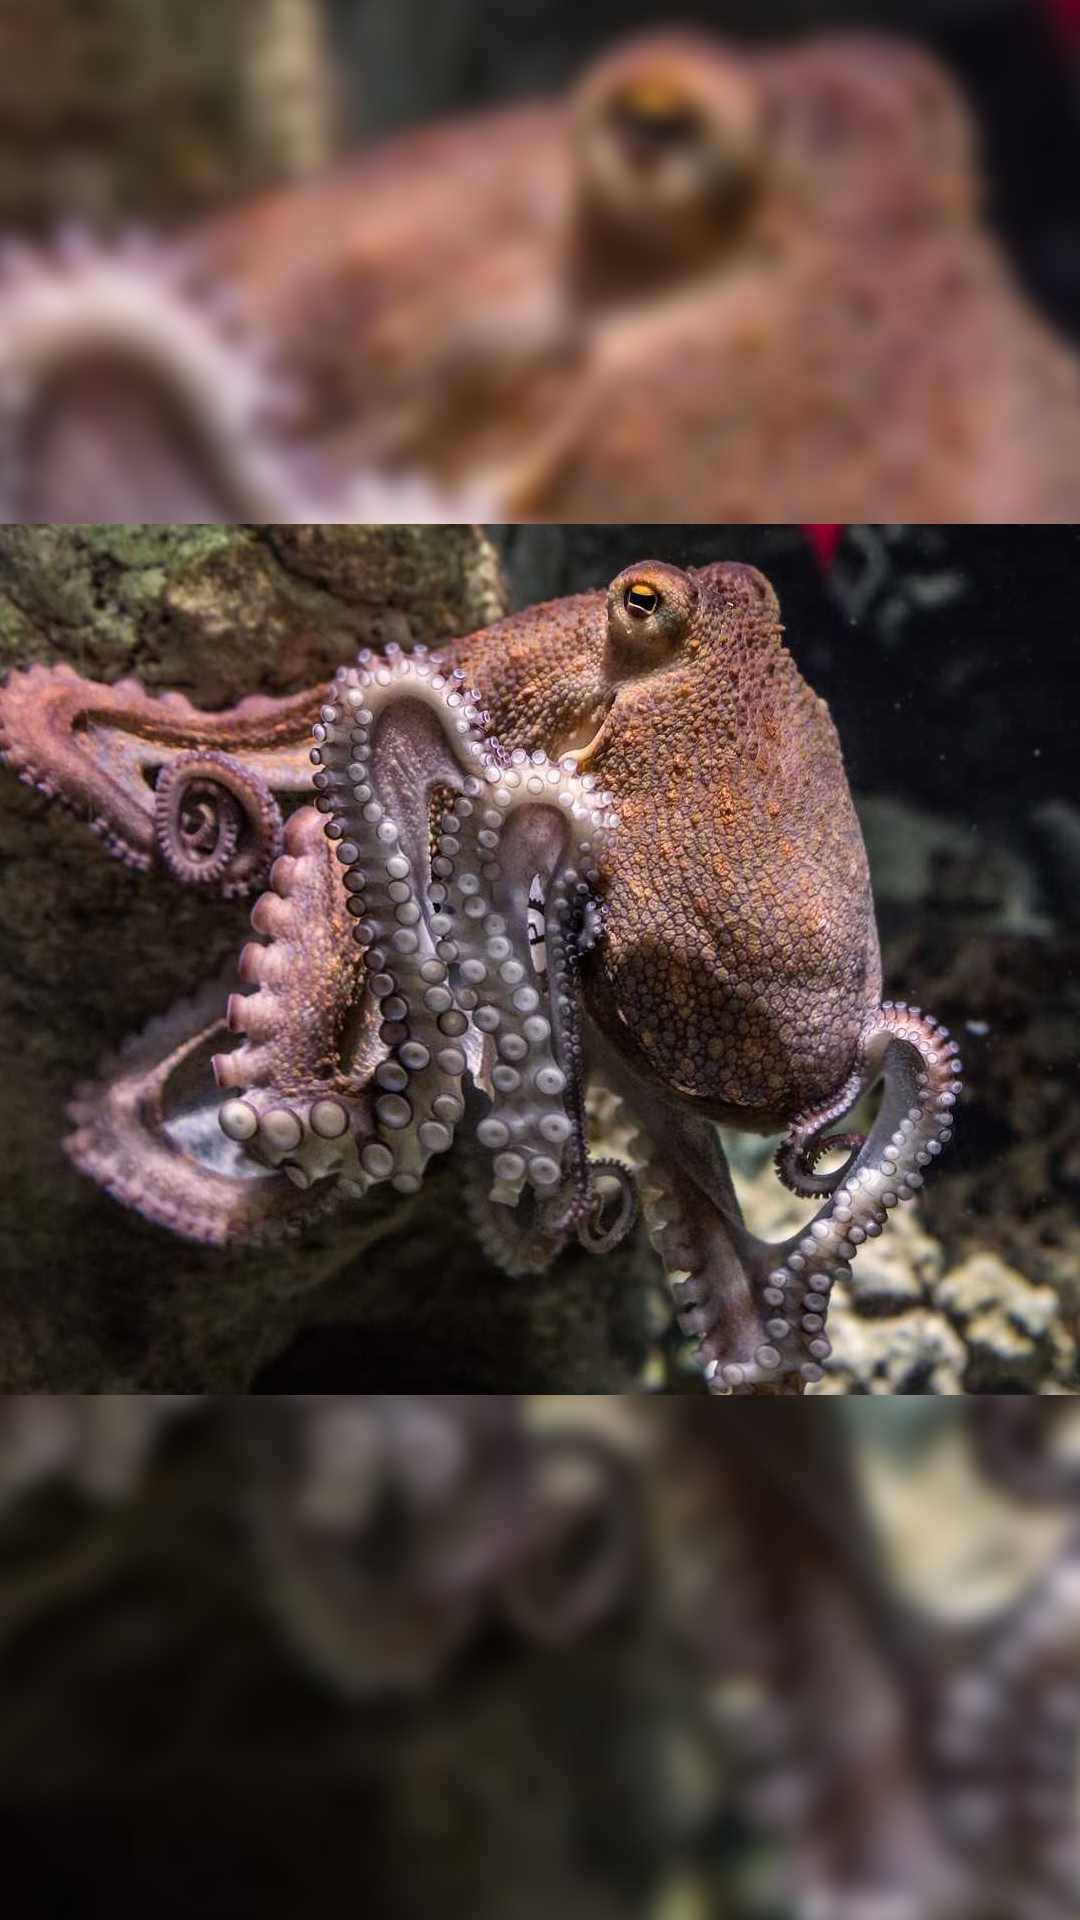 Octopus contains three hearts, one systemic heart, and two branchial hearts